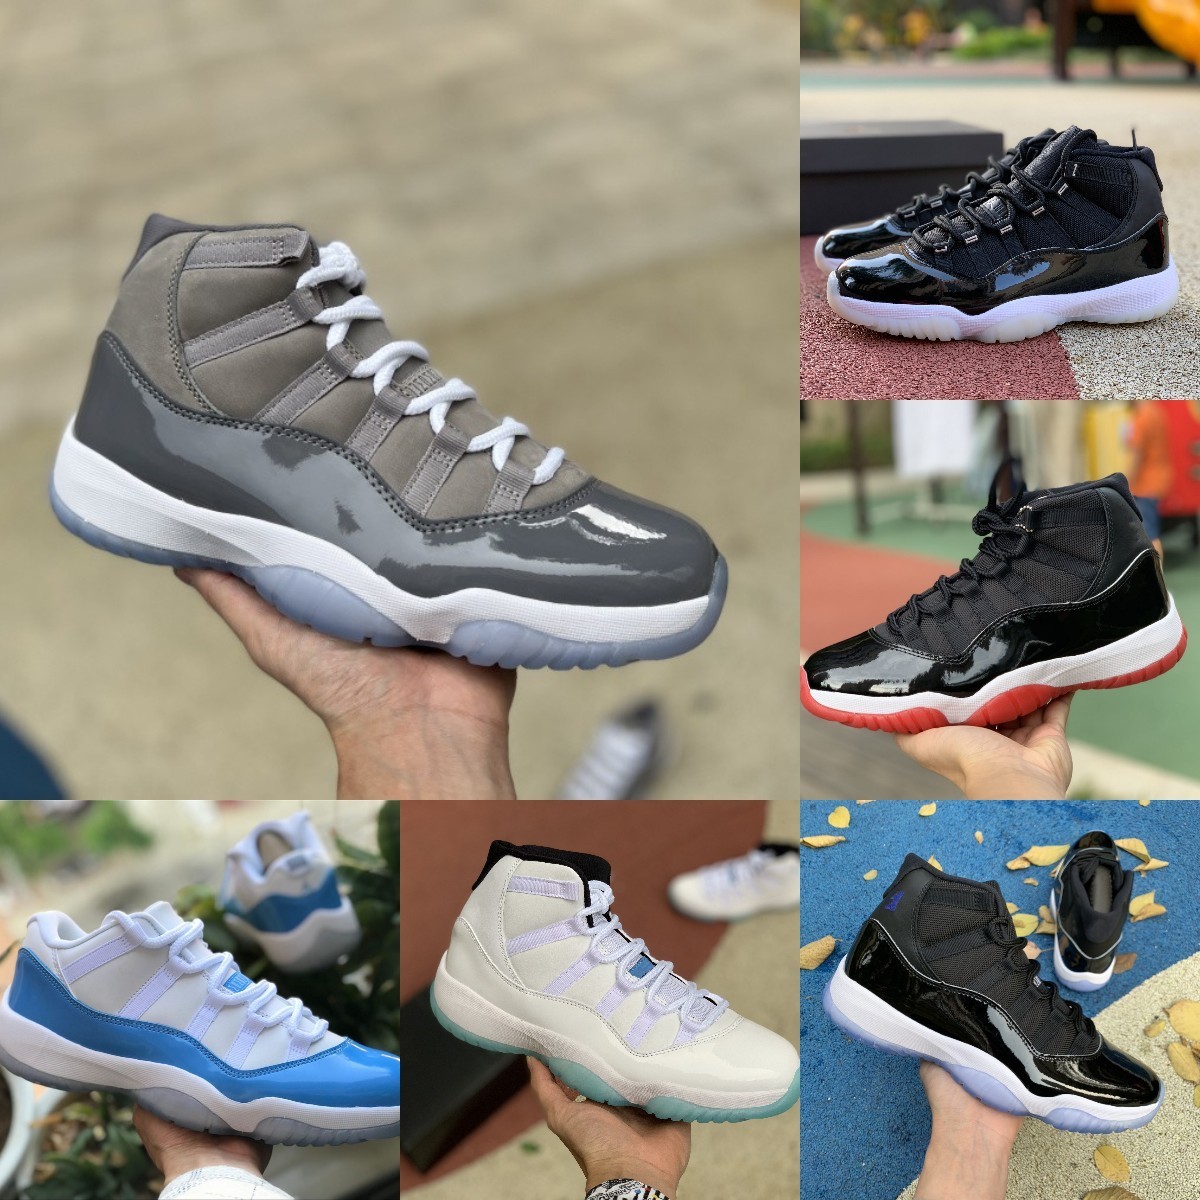 

Jumpman Jubilee Bred 11 11s High Basketball Shoes COOL GREY Legend Blue JORDÁN 25th Anniversary Space Jam Gamma Blue Easter Concord 45 Low Columbia Designer Sneakers, Please contact us